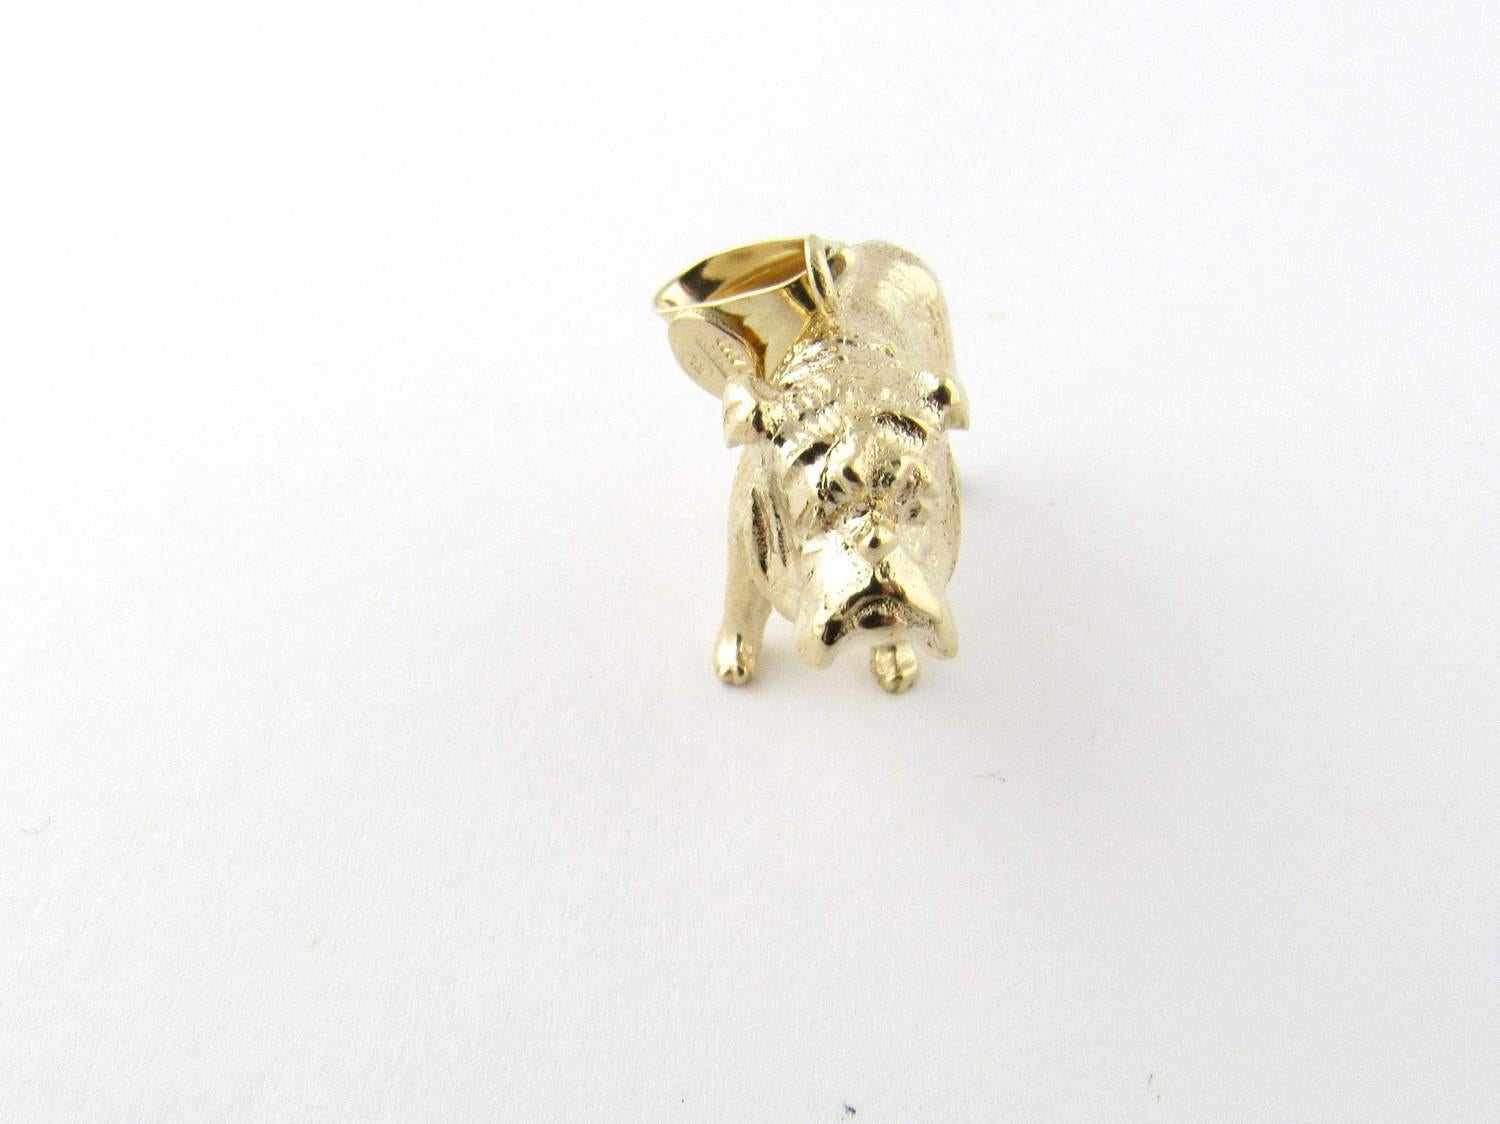 Vintage 14 Karat Yellow Gold Neapolitan Mastiff Charm

The Neapolitan Mastiff is a large, ancient dog breed known for its fearless and protective temperament. 

This 3D charm features the impressive Mastiff in meticulously detailed 14K gold. 

Size: